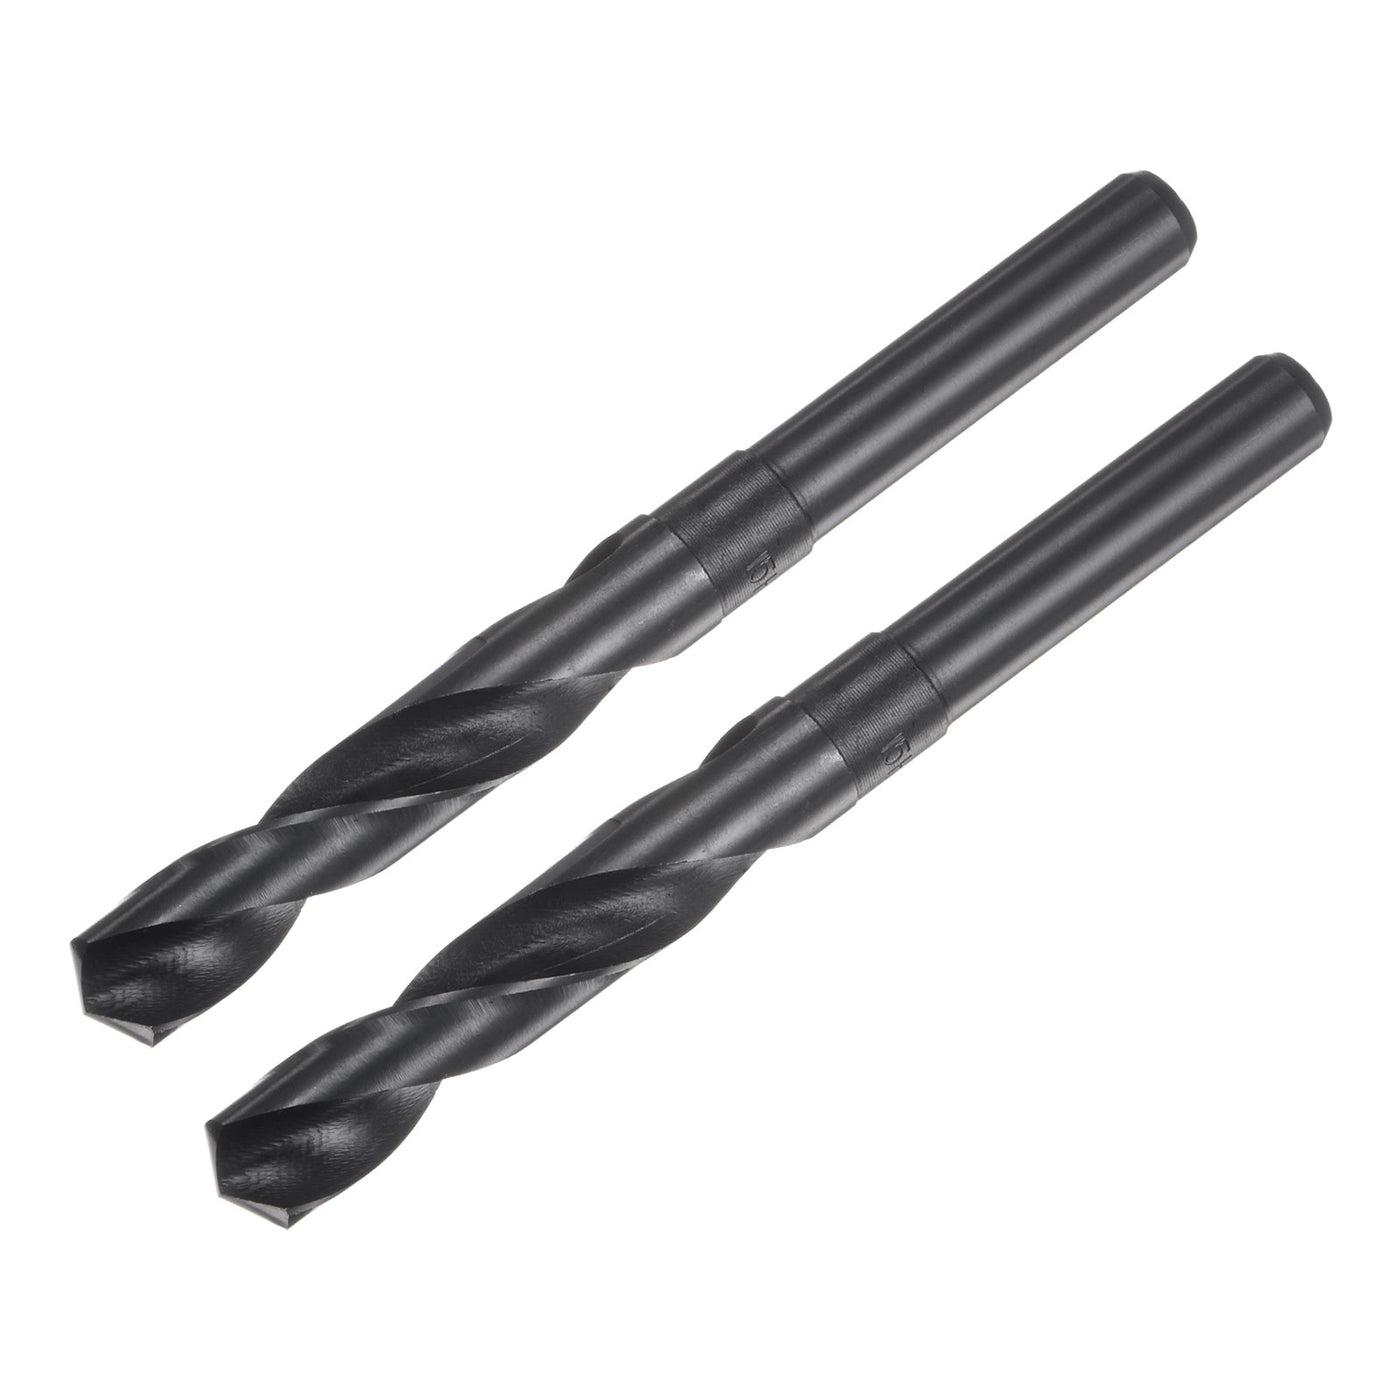 uxcell Uxcell 2pcs 15mm Black Oxide High Speed Steel HSS 9341 1/2" Reduced Shank Drill Bits